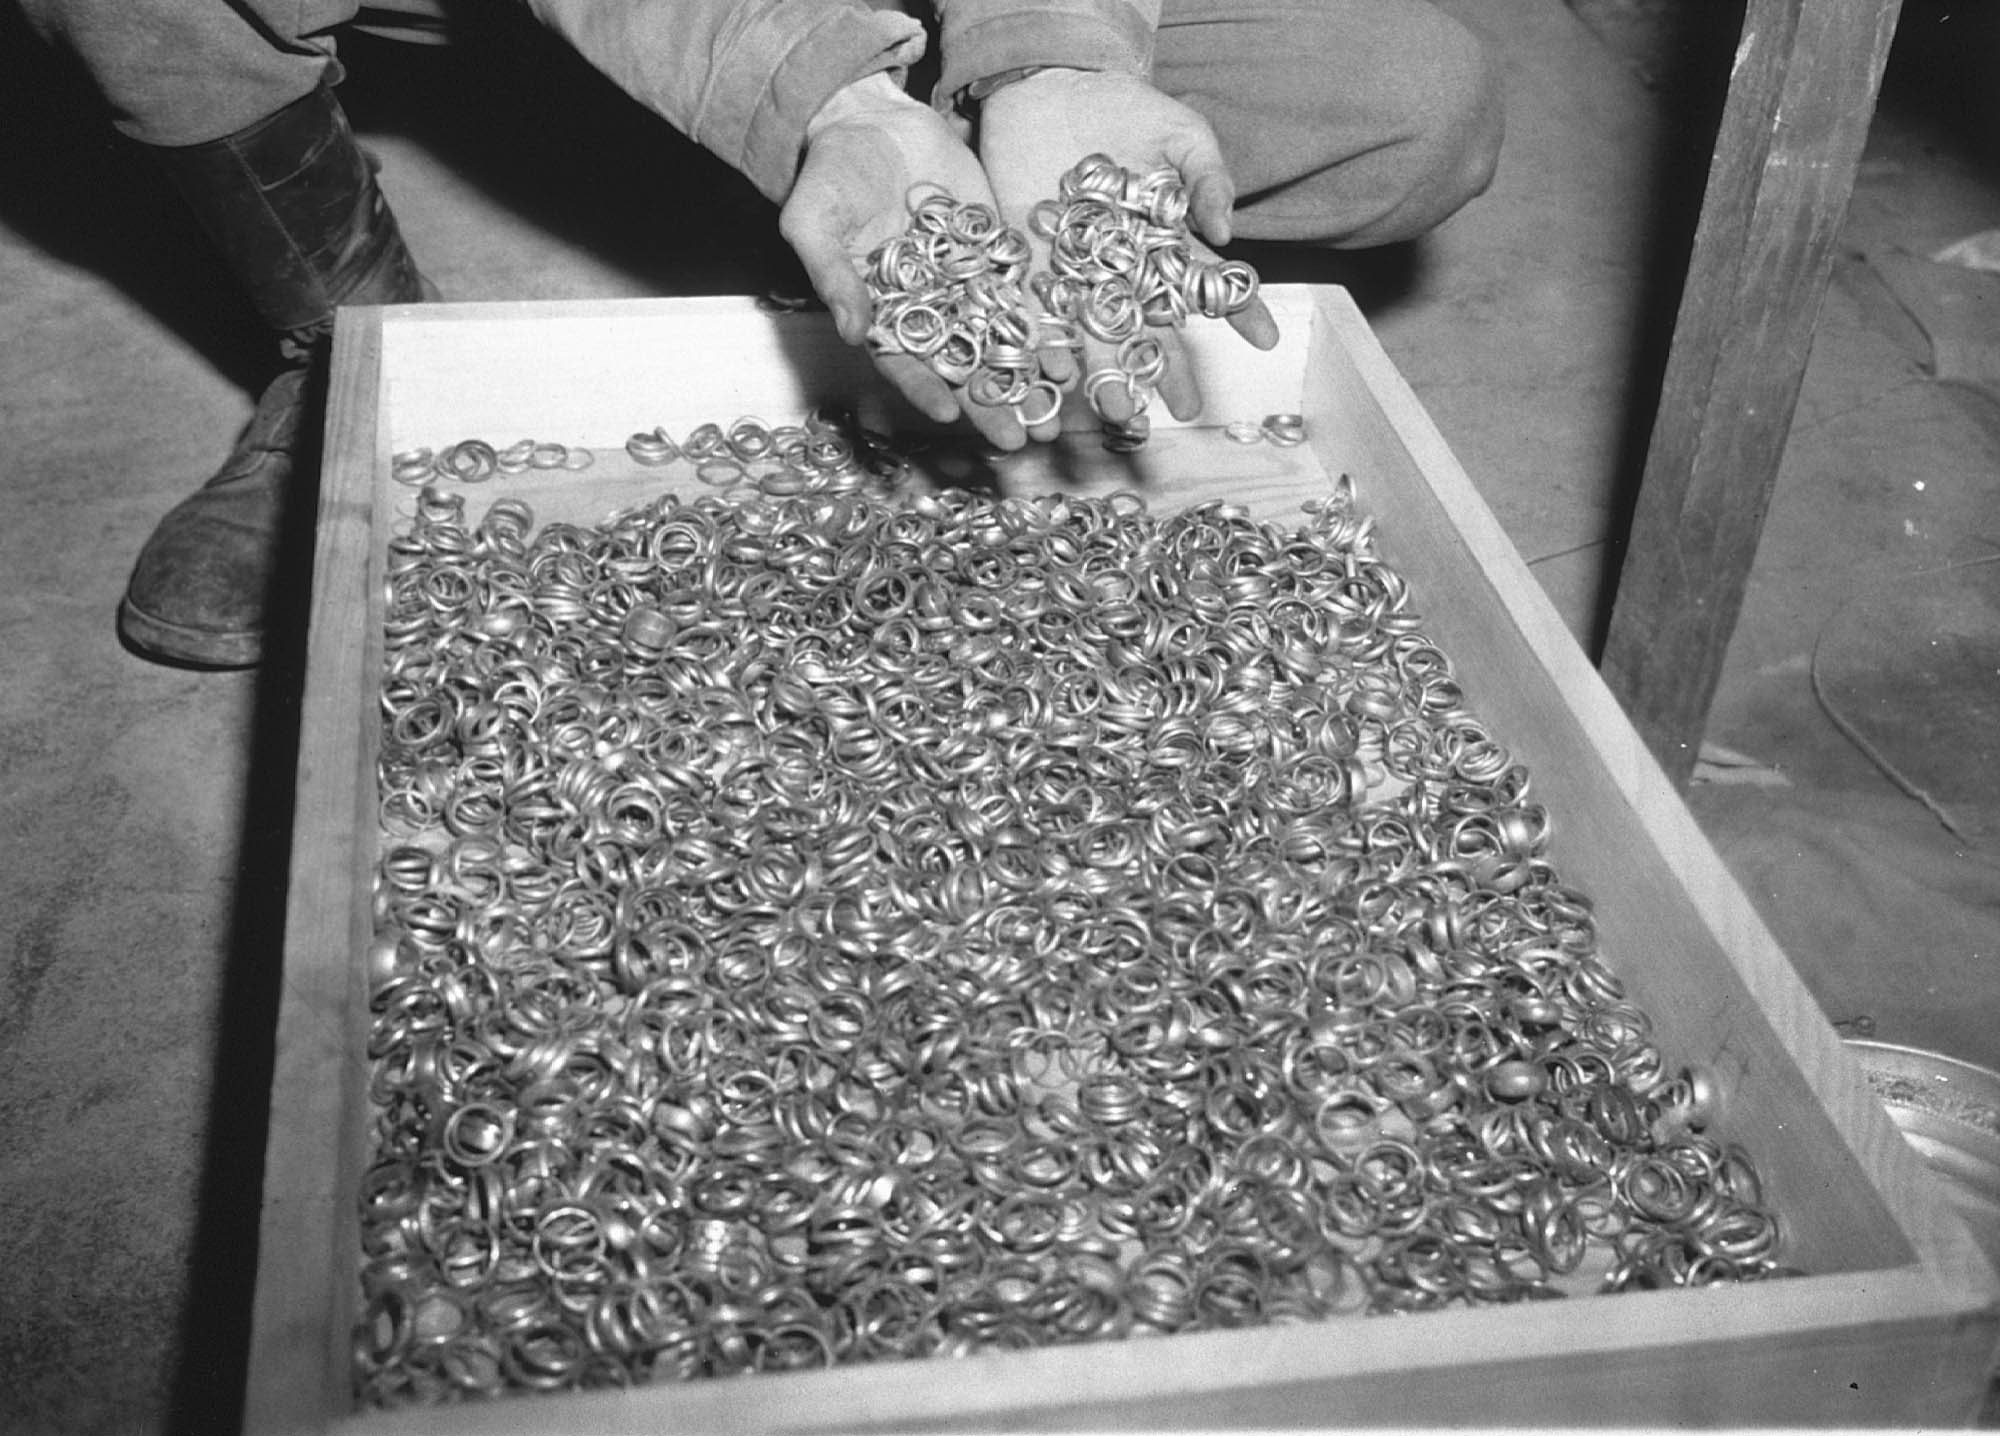 An American soldier poses with thousands of gold rings taken from Jews in concentration camps